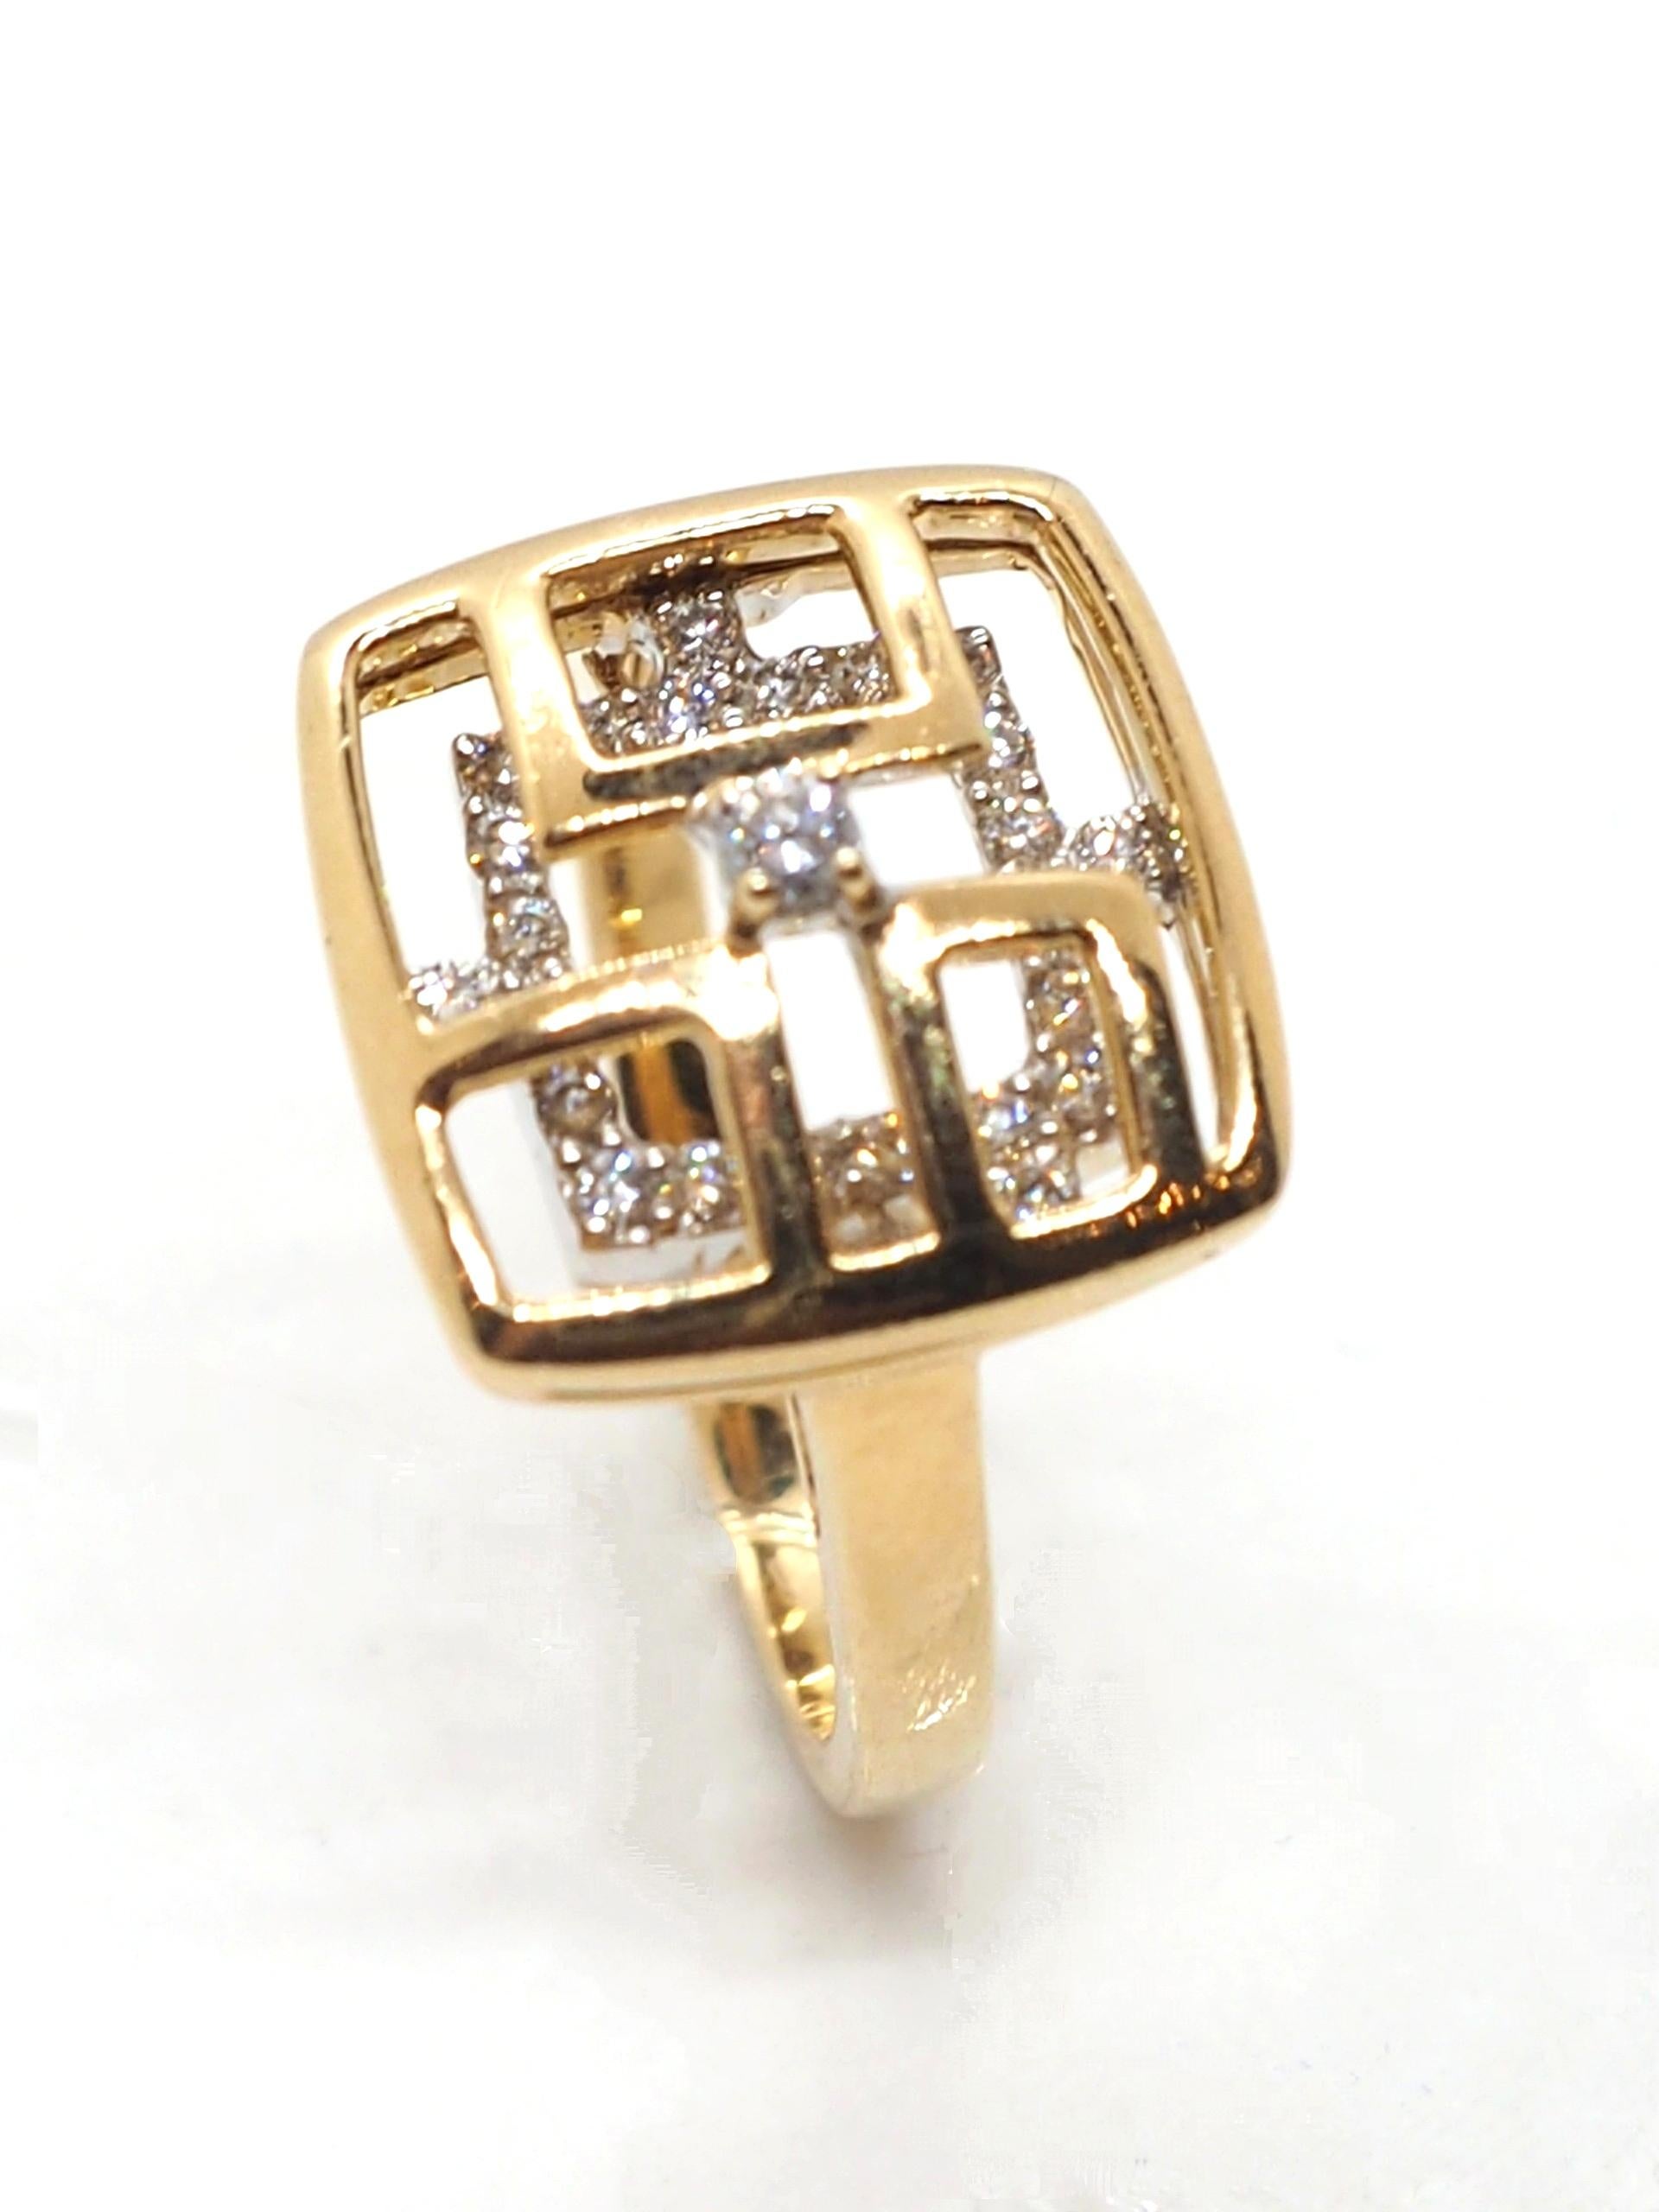 Diamond cocktail ring crafted in solid 14 Karat two tone gold, geometric square shape.

Elevate your style with our chic modern fashion ring, meticulously crafted in 14k yellow and white gold and adorned with a total of 0.5 carats of dazzling